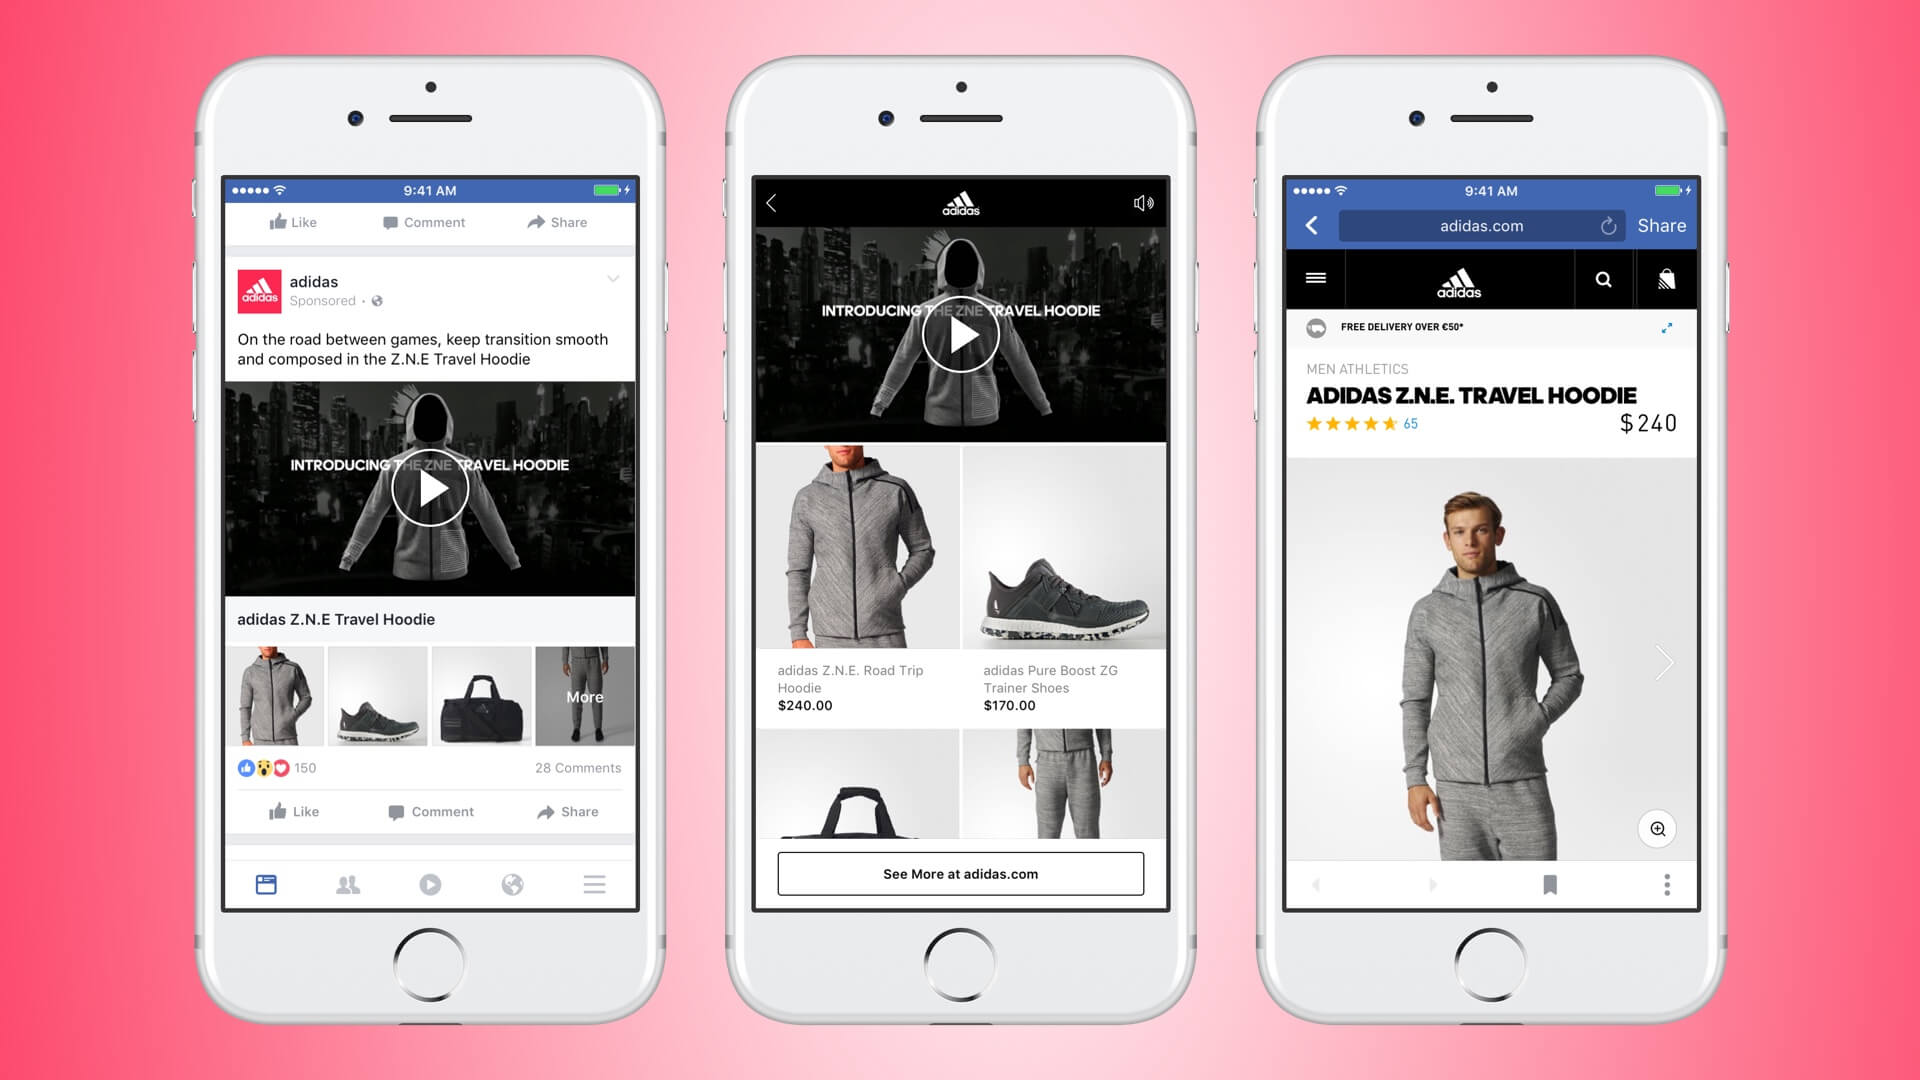 Facebook’s shoppable ‘Collection’ ad is its latest iAd-like format